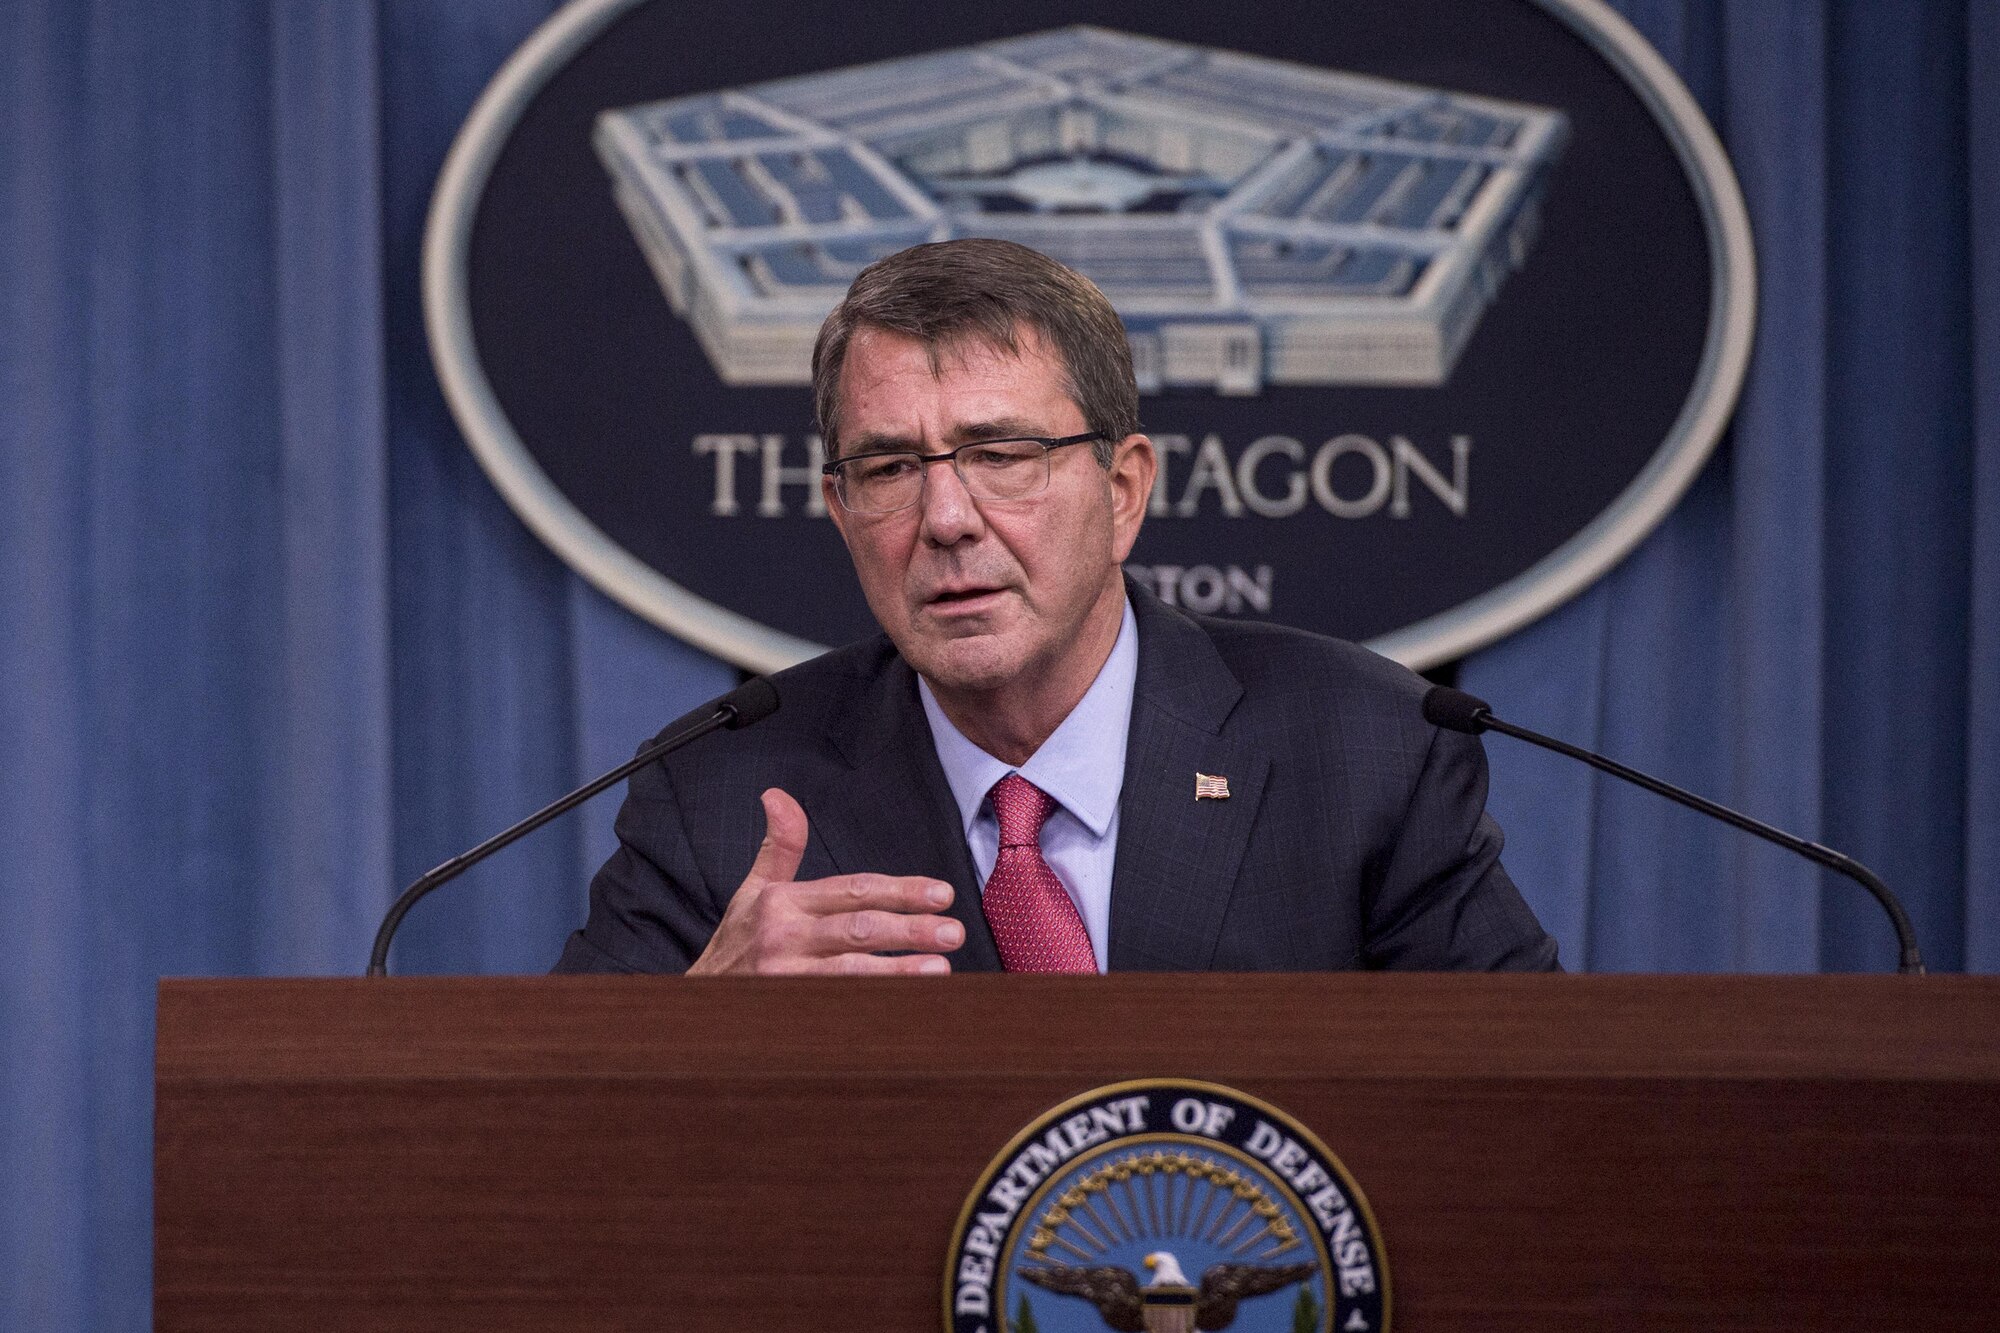 Secretary of Defense Ash Carter conducts a press briefing at the Pentagon to announce the latest in his Force of the Future reforms focused on improving the quality of life for military personnelJan 28, 2016.(DoD photo by Senior Master Sgt. Adrian Cadiz)(Released)